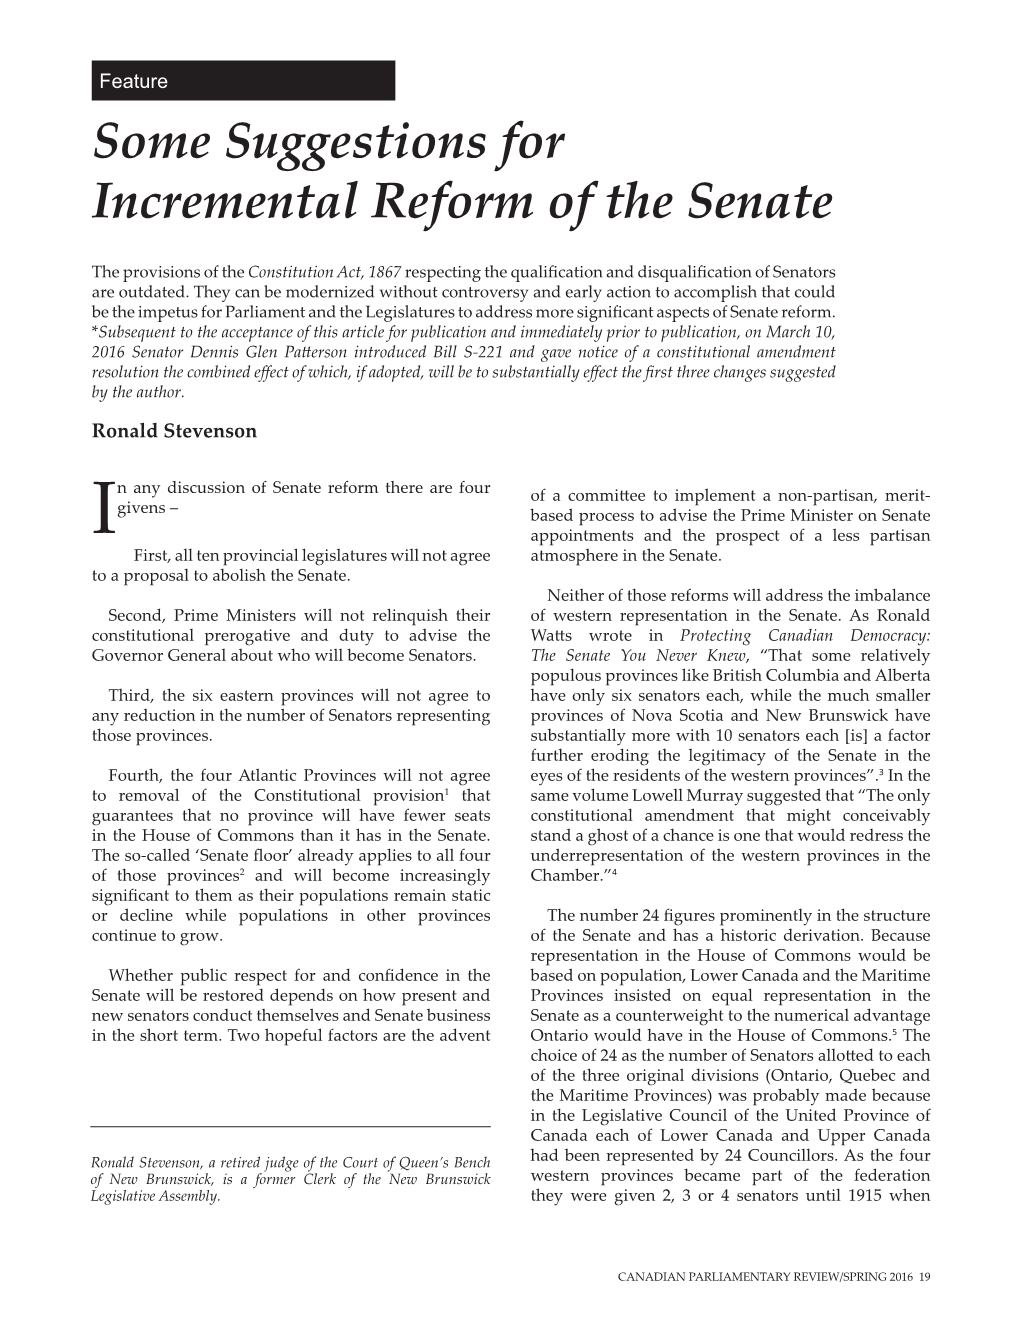 Some Suggestions for Incremental Reform of the Senate